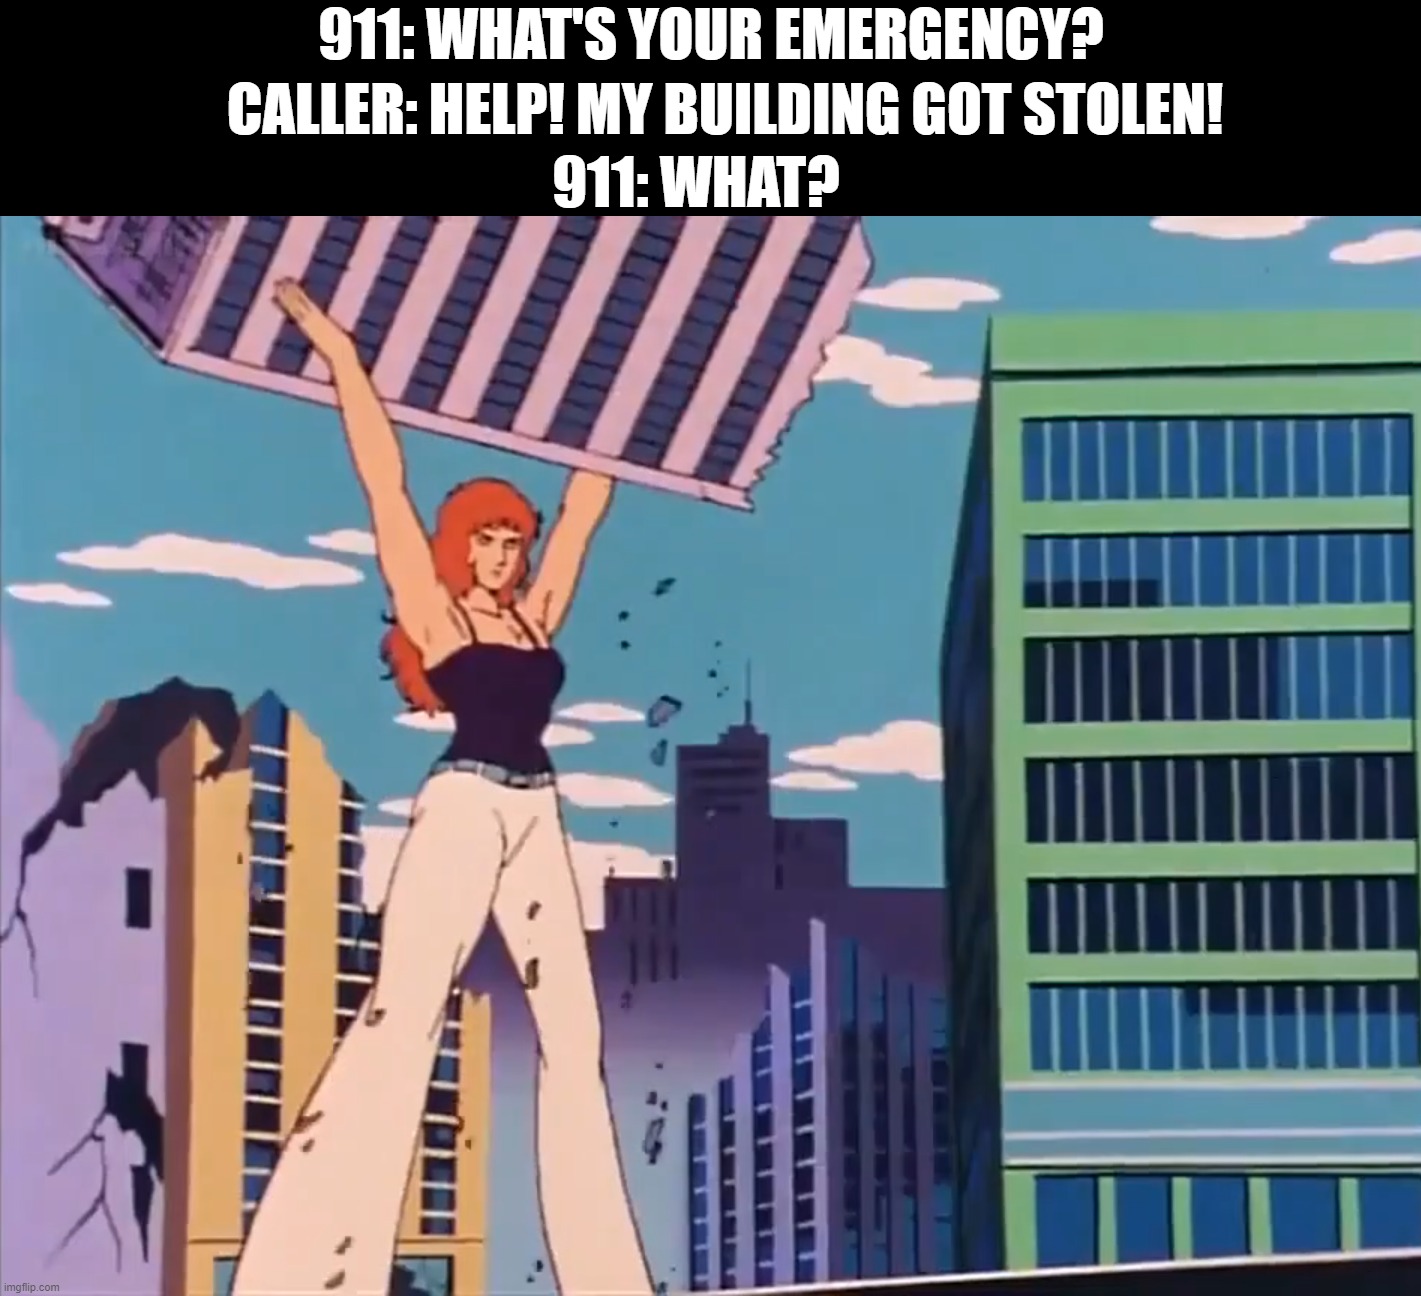 your building got what? | 911: WHAT'S YOUR EMERGENCY? CALLER: HELP! MY BUILDING GOT STOLEN! 911: WHAT? | image tagged in emergency call,stolen | made w/ Imgflip meme maker